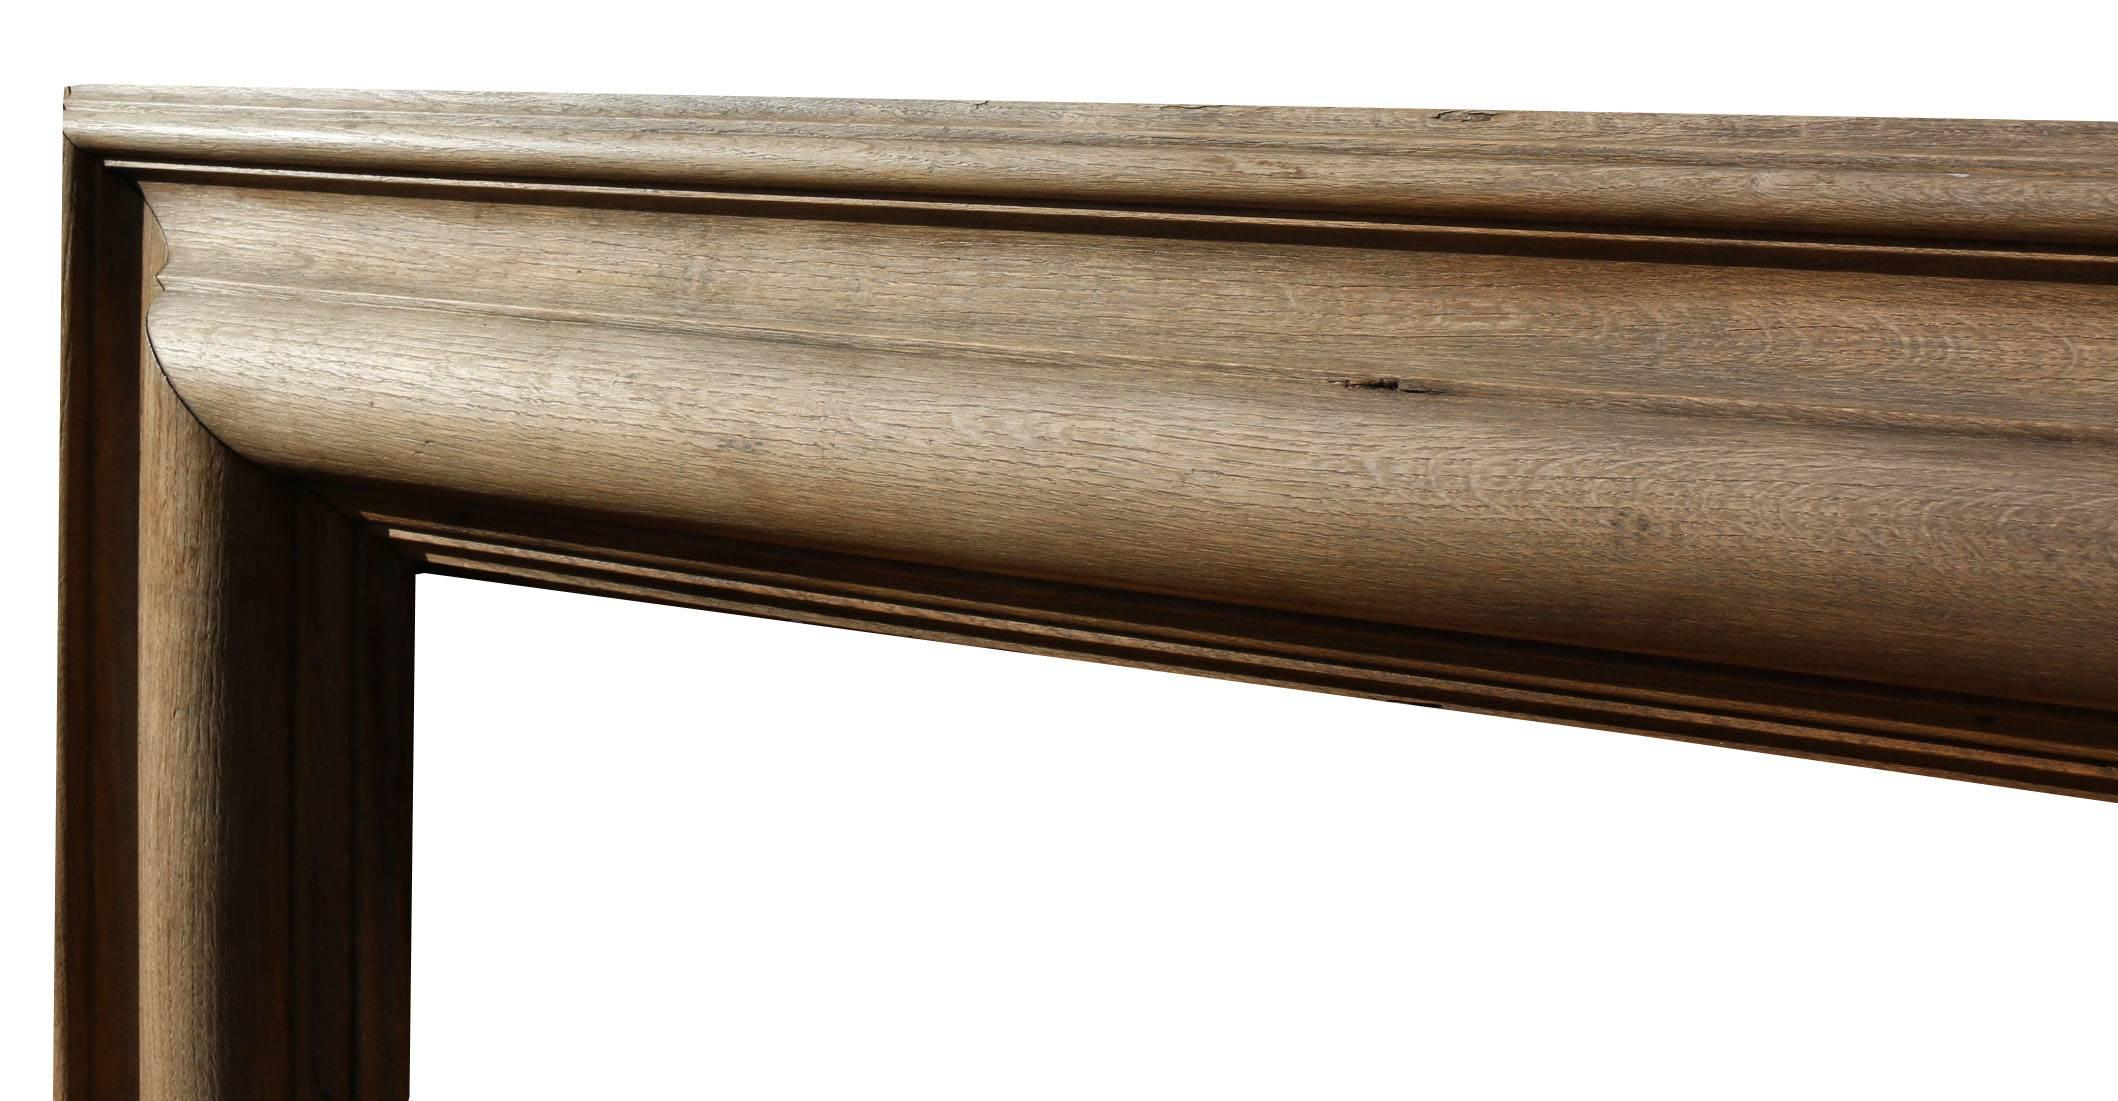 This fire surround has a stripped finish.
Measure: Opening height 95.5 cm
Opening width 99 cm
Weight 31 kg.